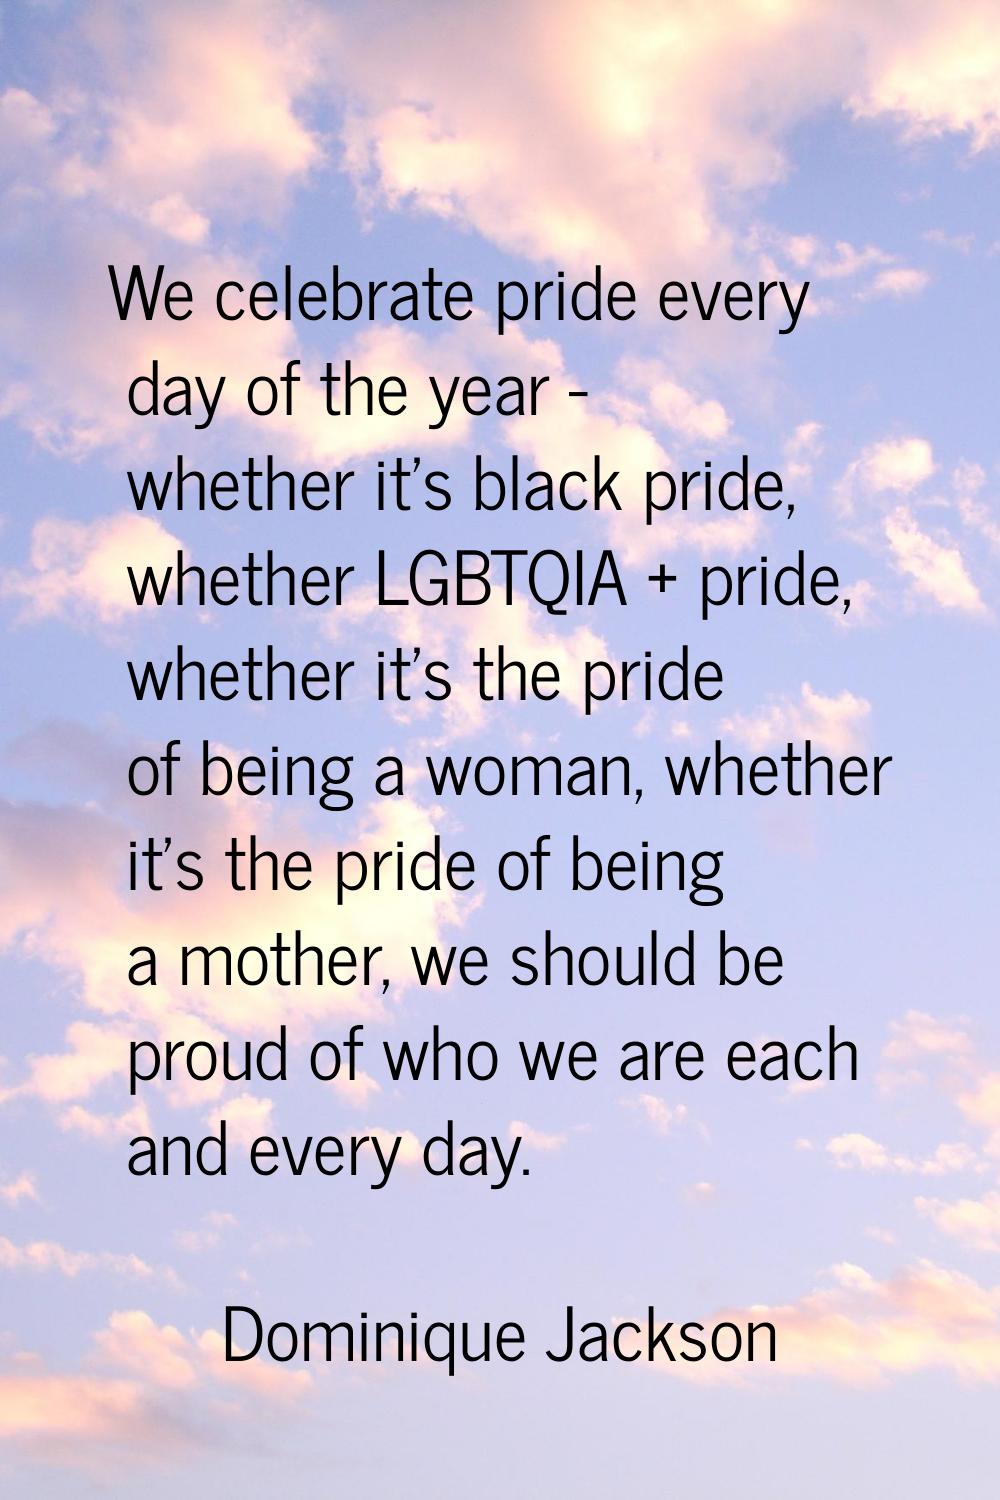 We celebrate pride every day of the year - whether it's black pride, whether LGBTQIA + pride, wheth